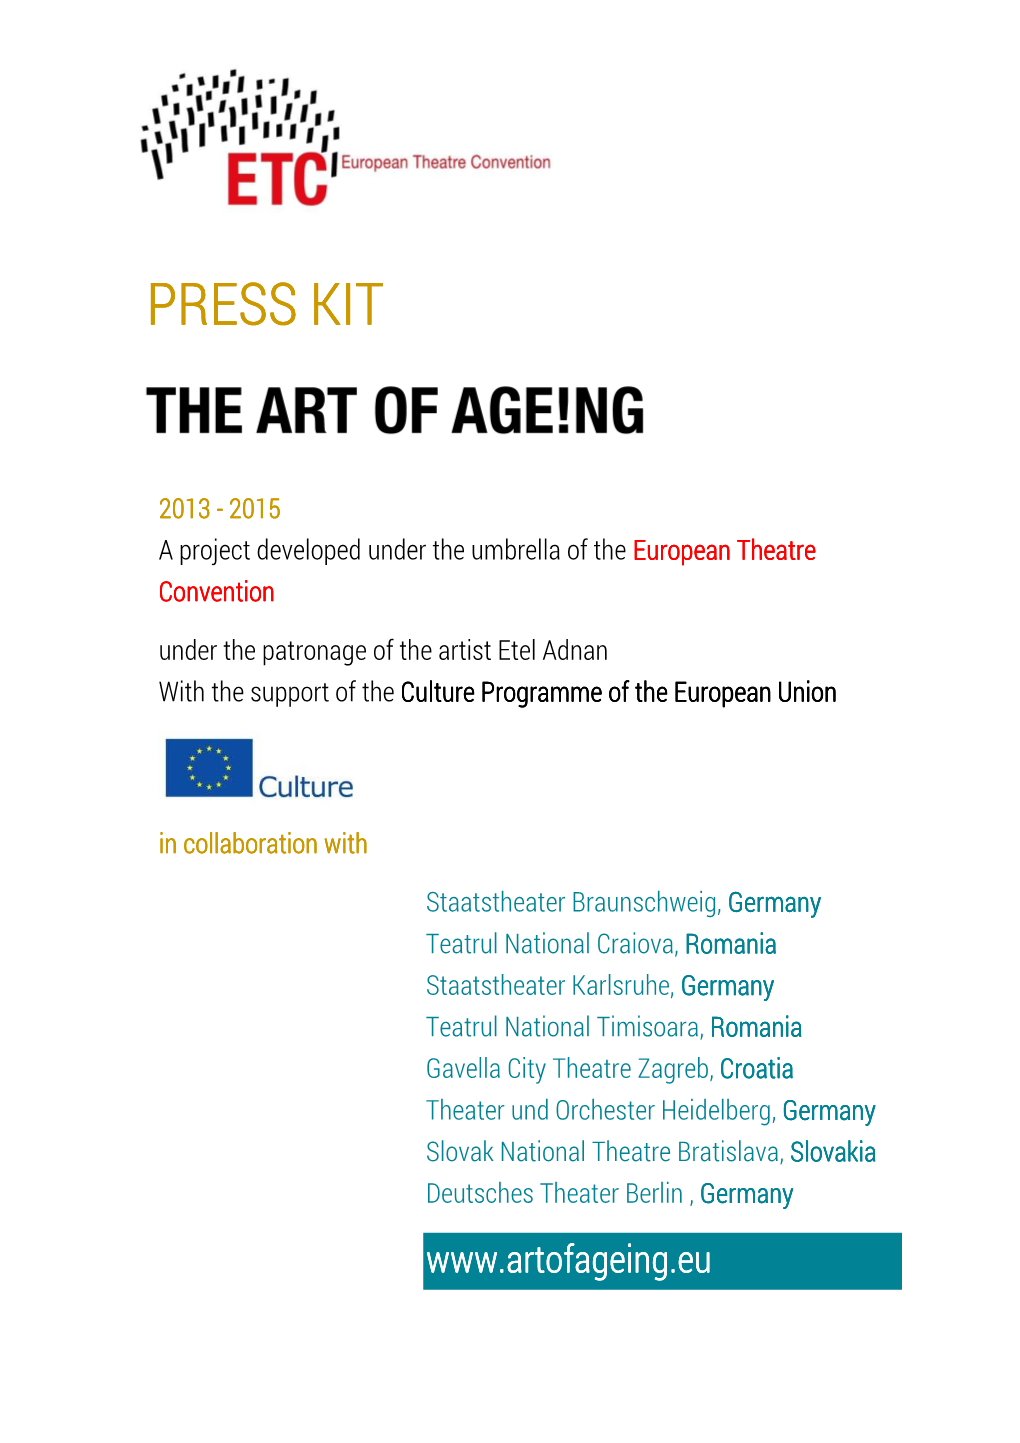 The Art of Ageing Press